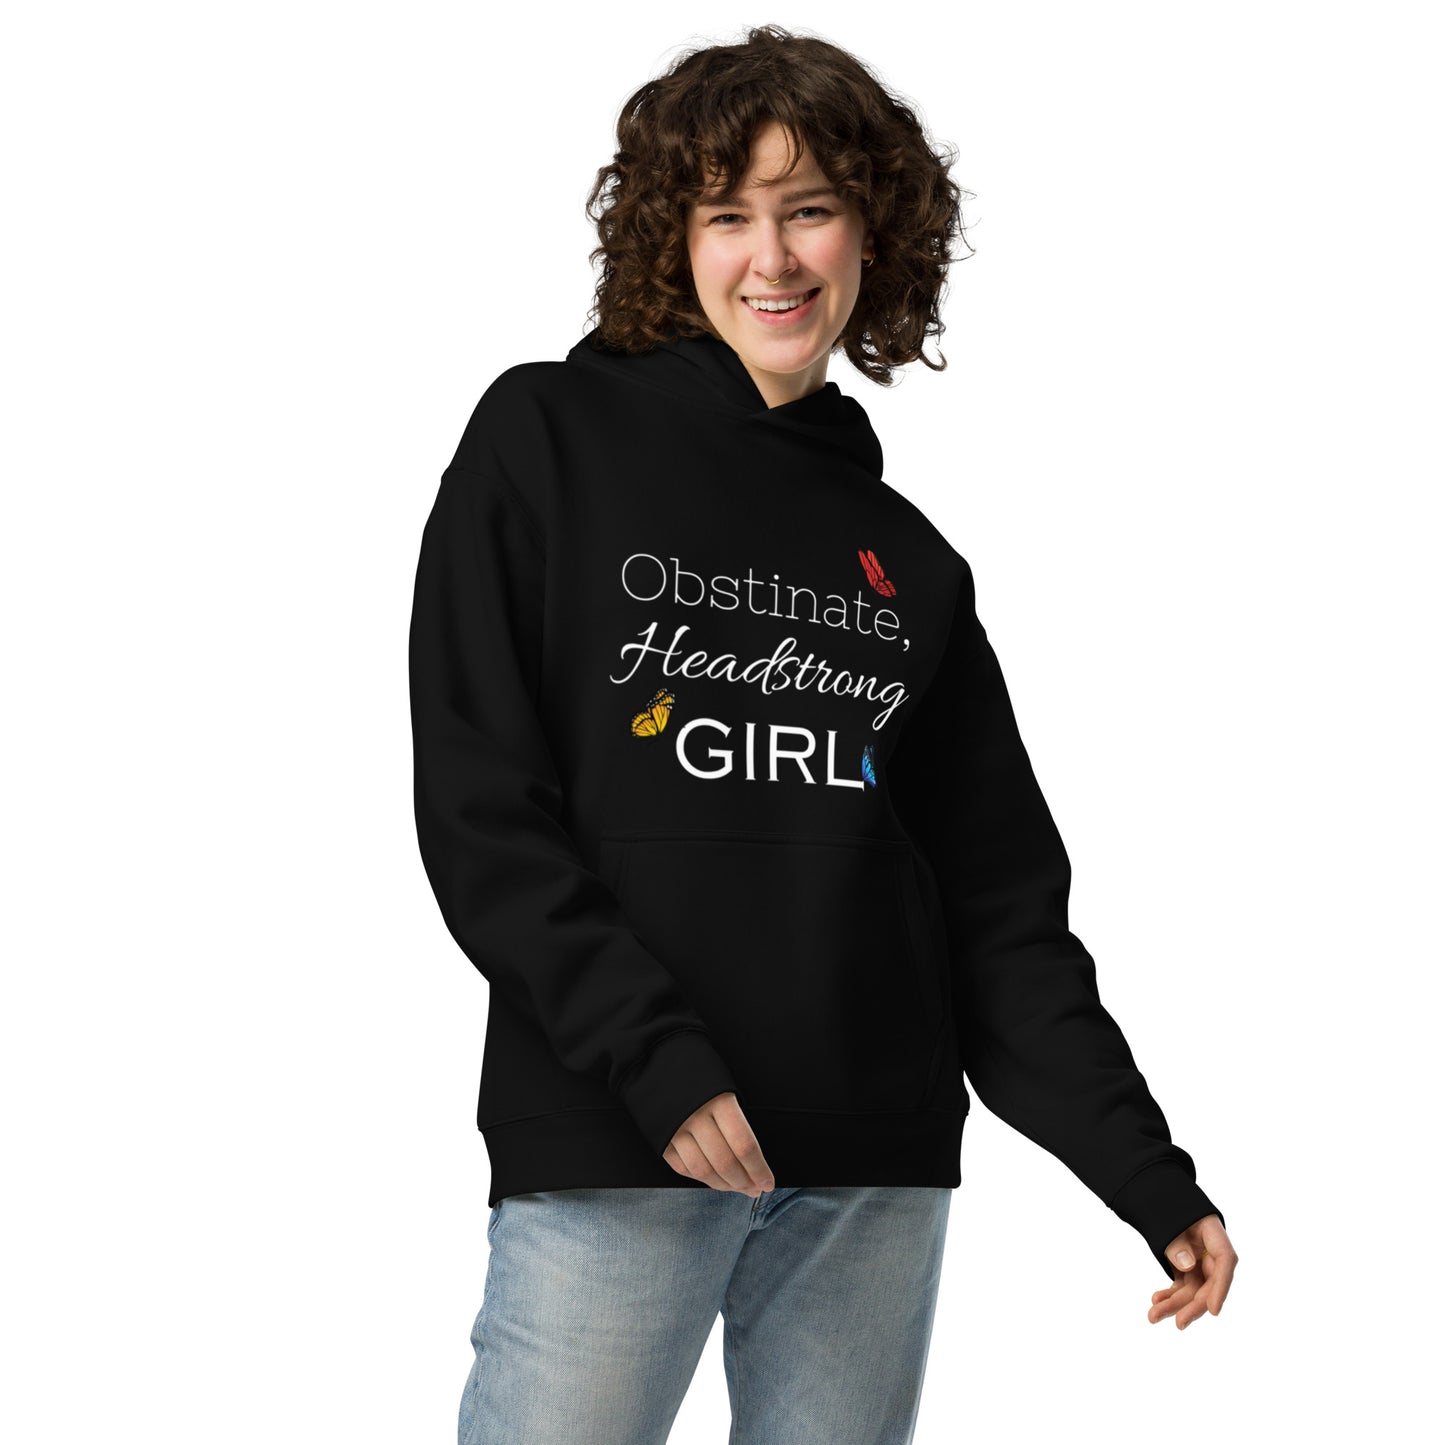 Obstinate, Headstrong Girl Unisex oversized hoodie